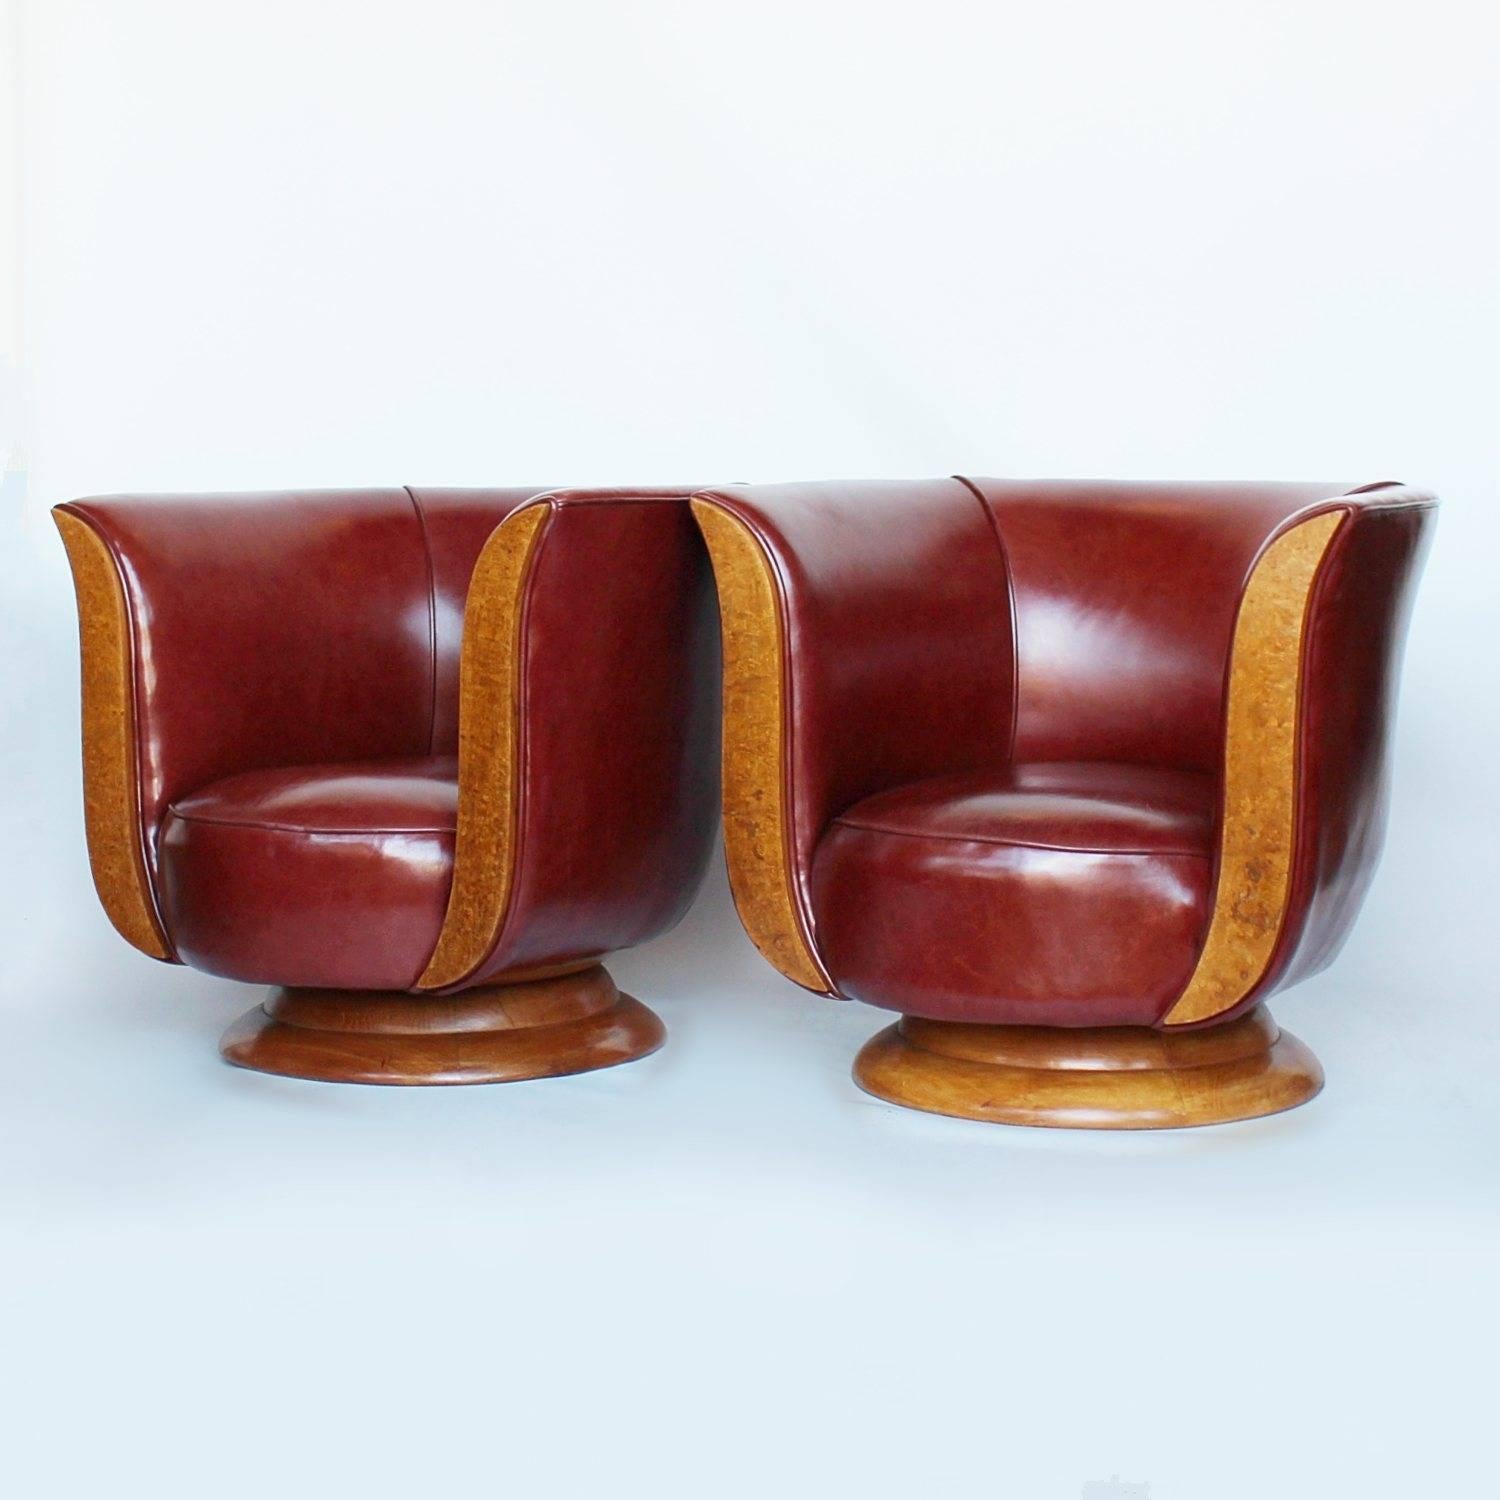 A pair of Art Deco tulip chairs with burr walnut show wood and solid walnut circular base. Upholstered in chestnut leather.
Dimensions:
 H 61cm, W 74cm, D 70cm, 
Seat H 29cm, Seat D 50cm
Origin: French
Date: circa 1930
Item No: 2802181.